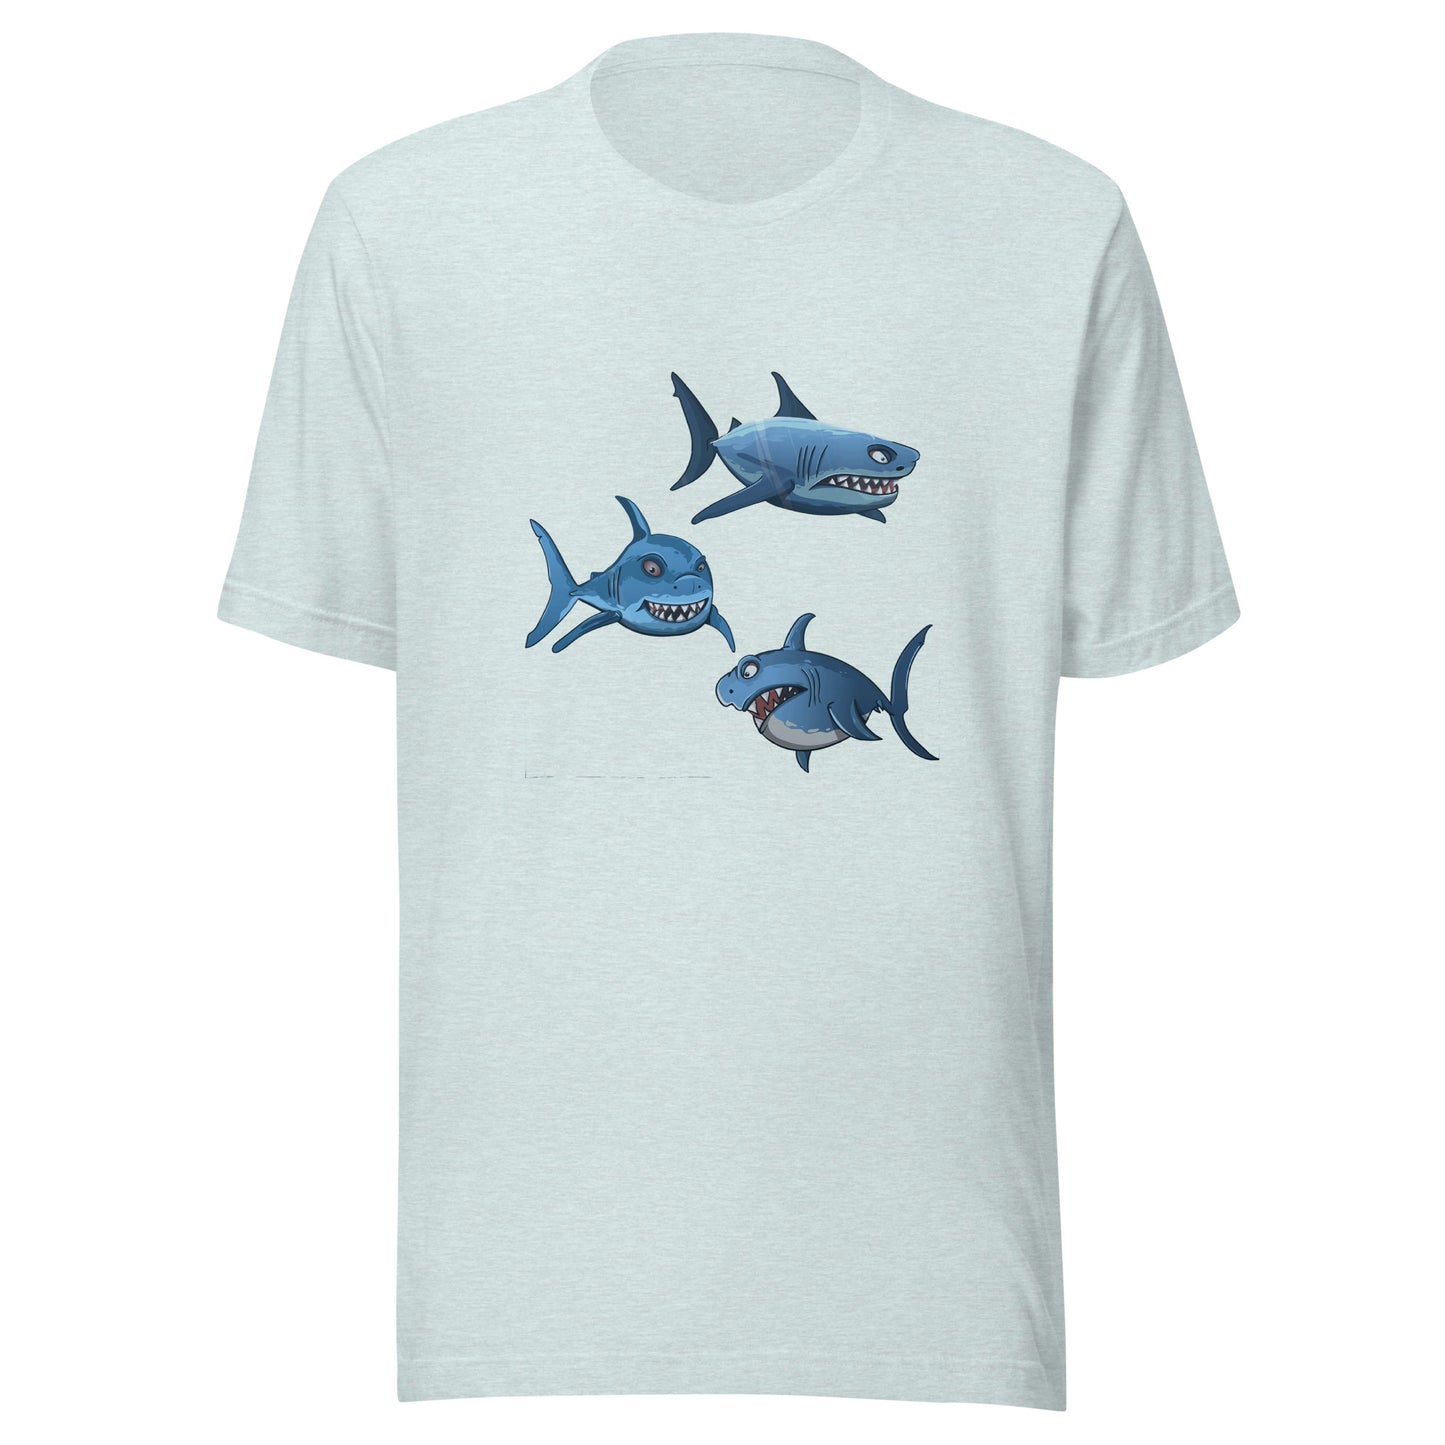 Women and Men's (Unisex) T-Shirt Printed with Sharks